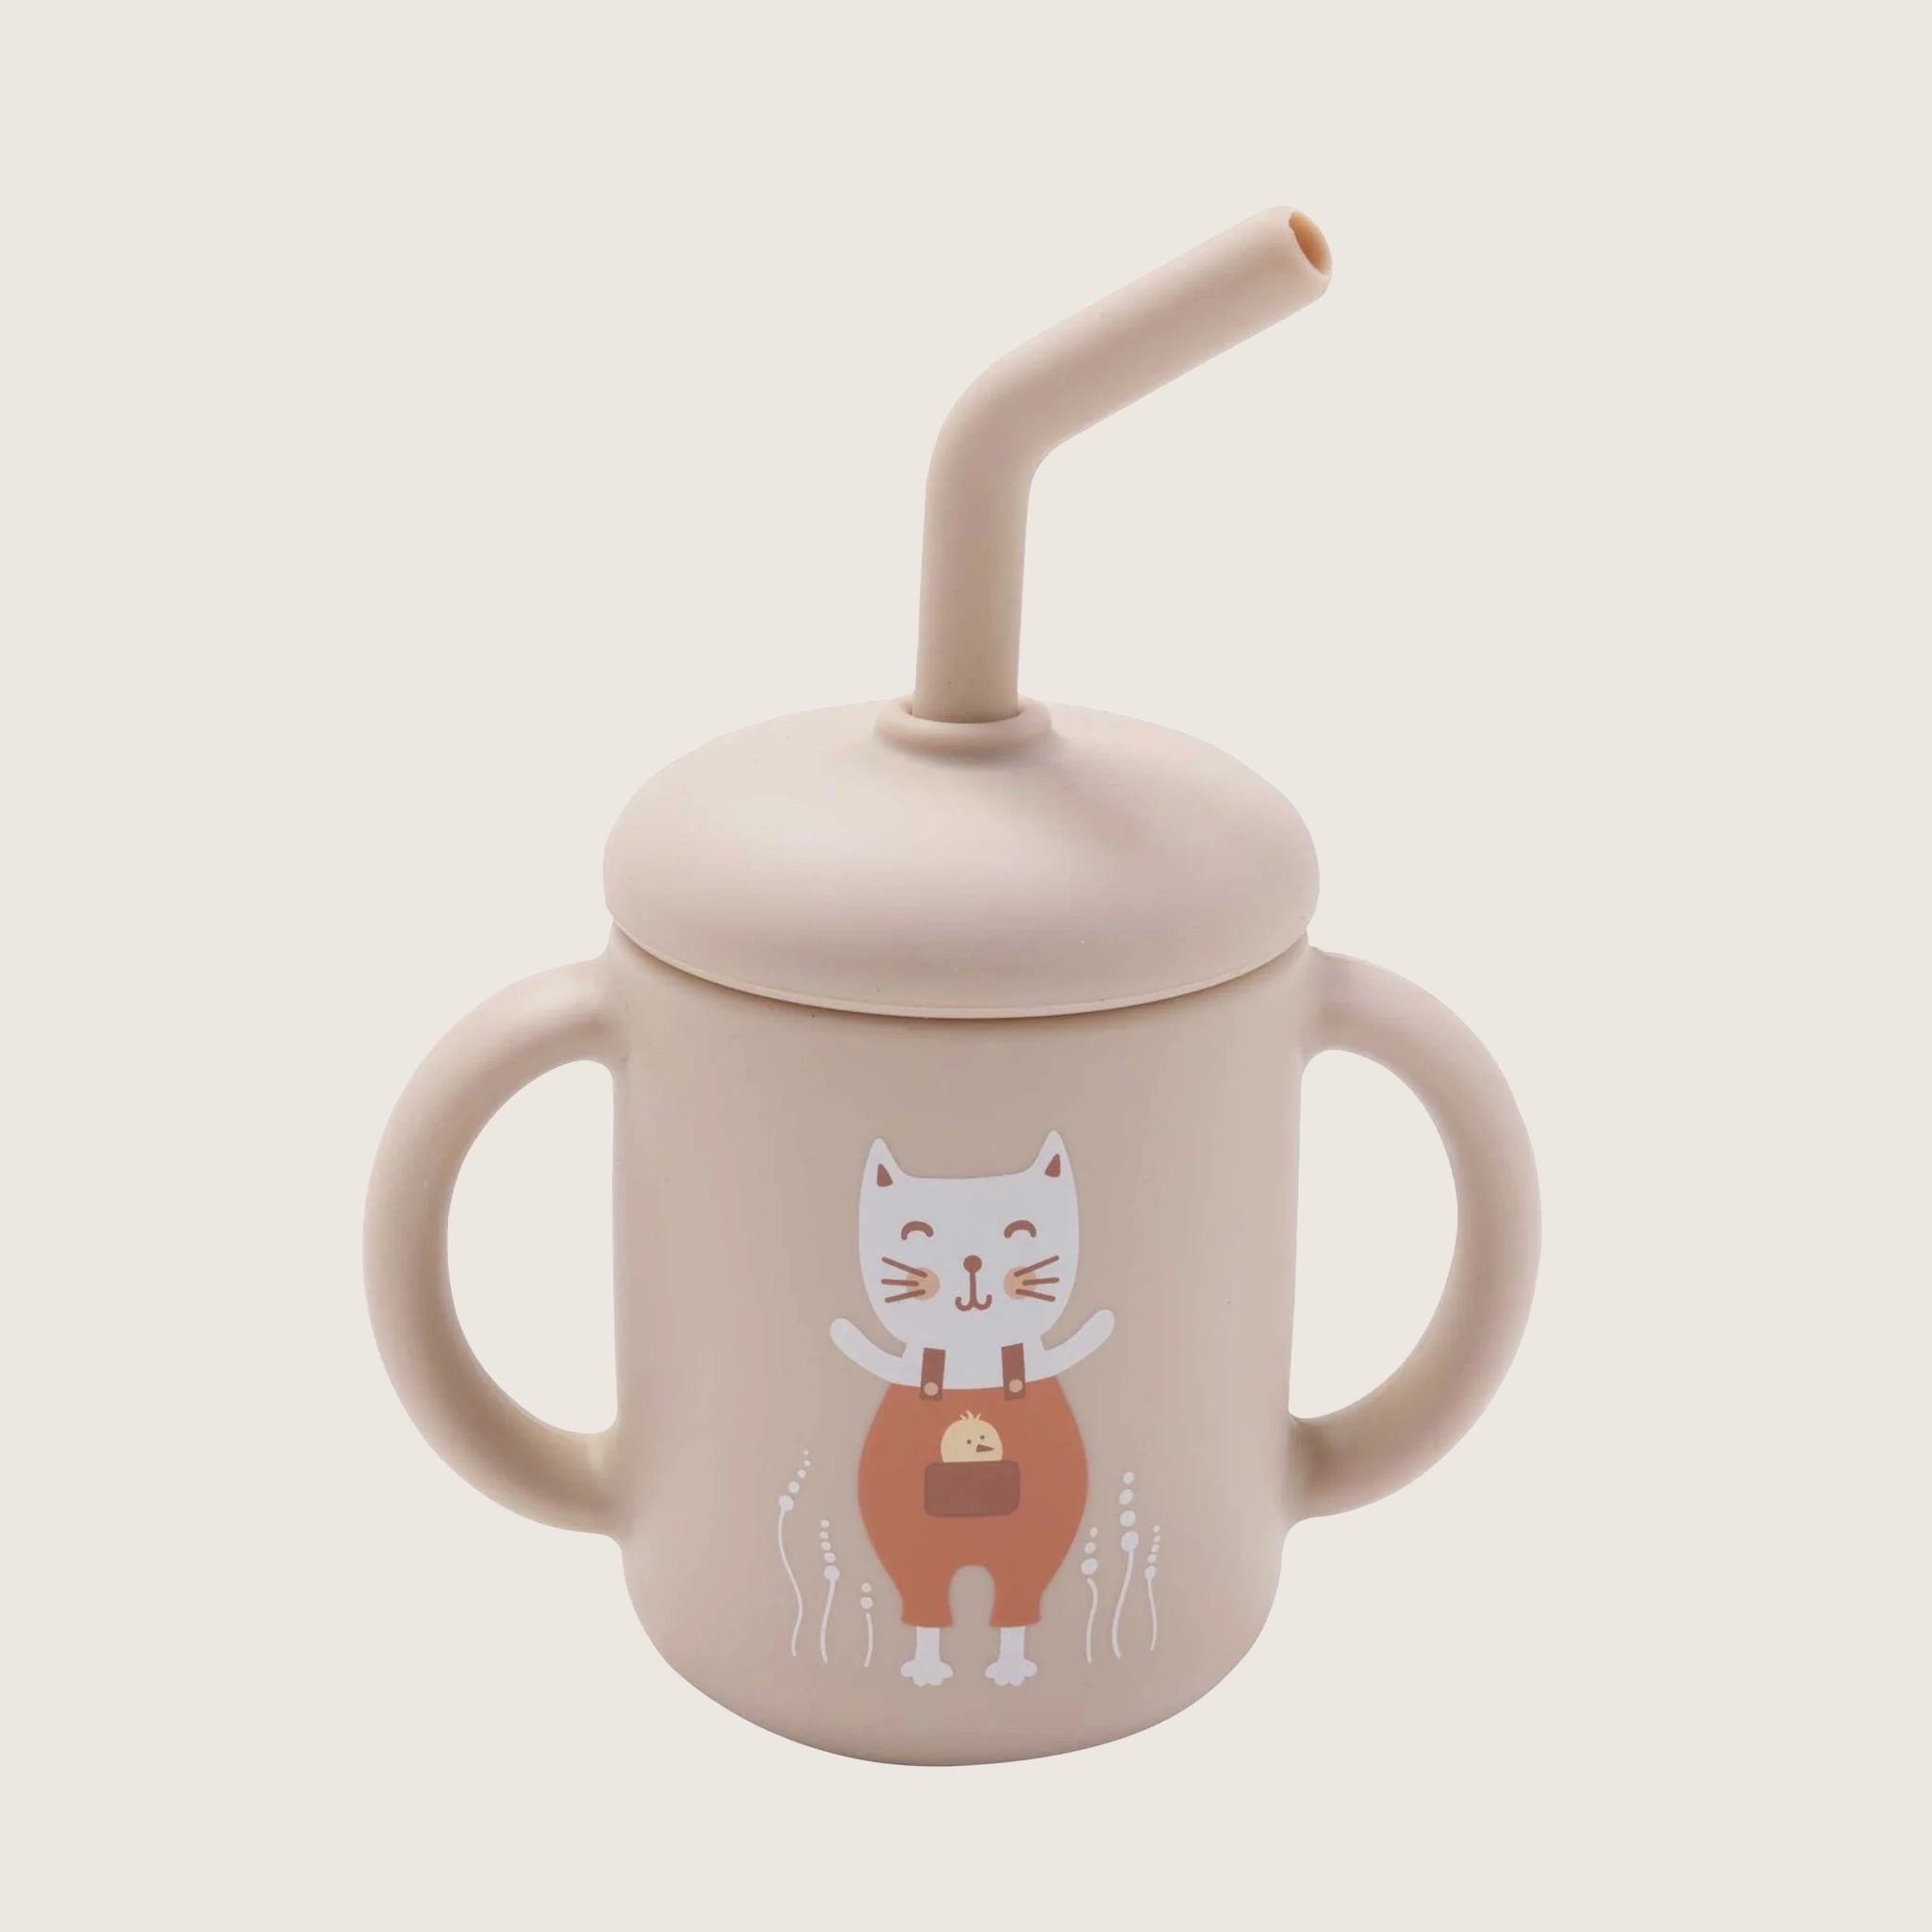 On a cream background is a light pink sippy cup with two handles and straw, designed with a white kitten illustration on the front. 